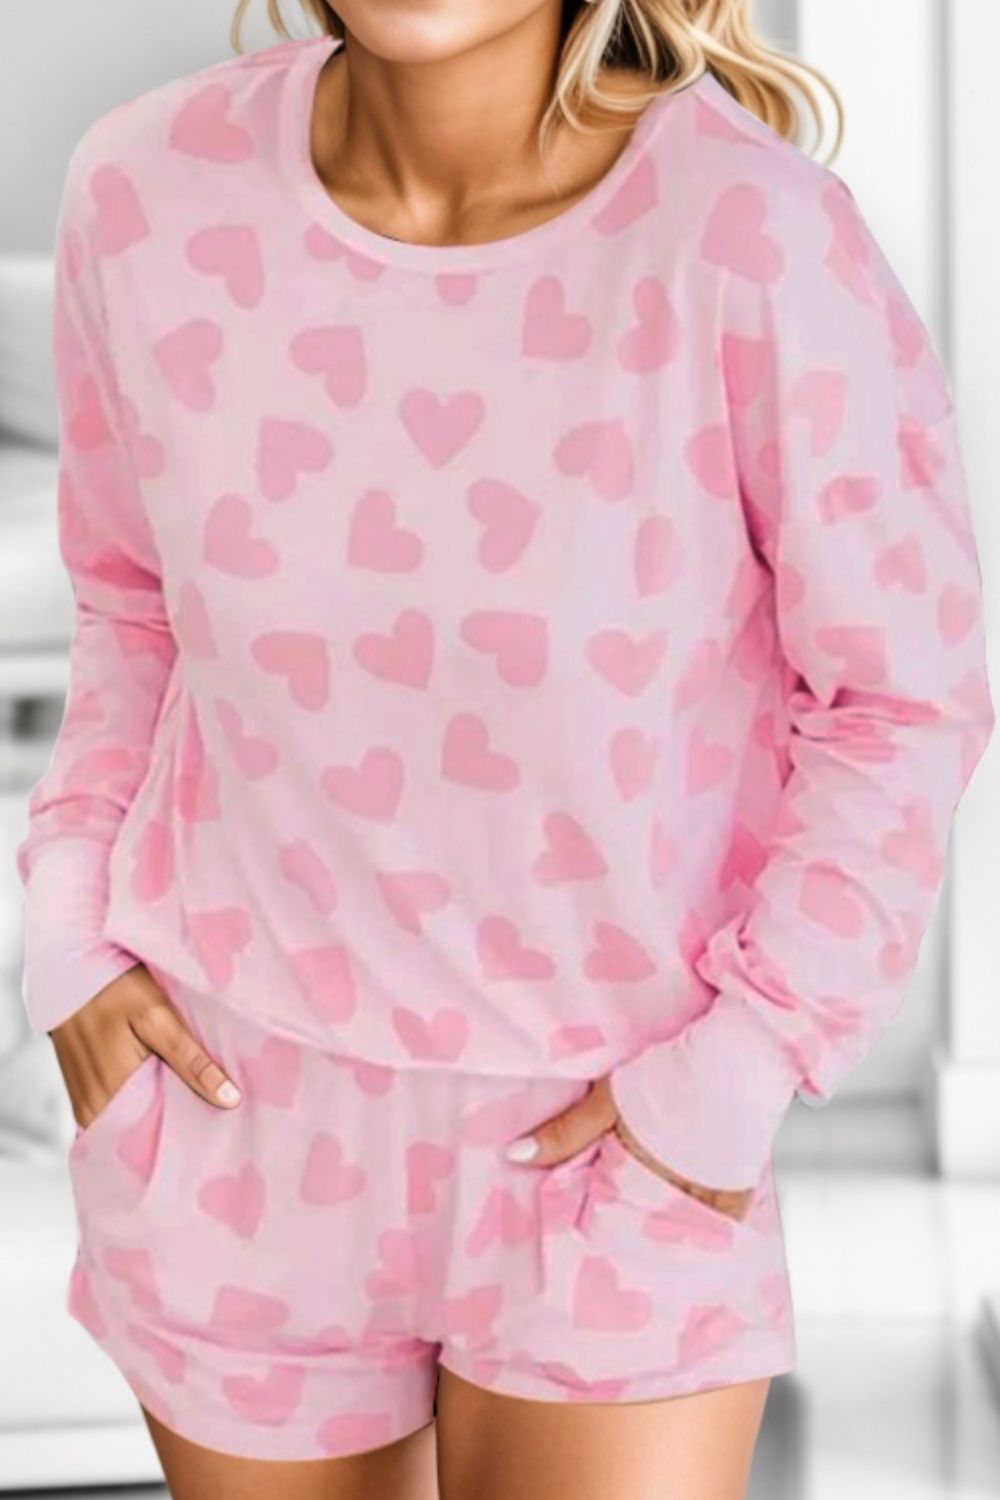 Styletrendy Heart Print Round Neck Top and Shorts Lounge Set